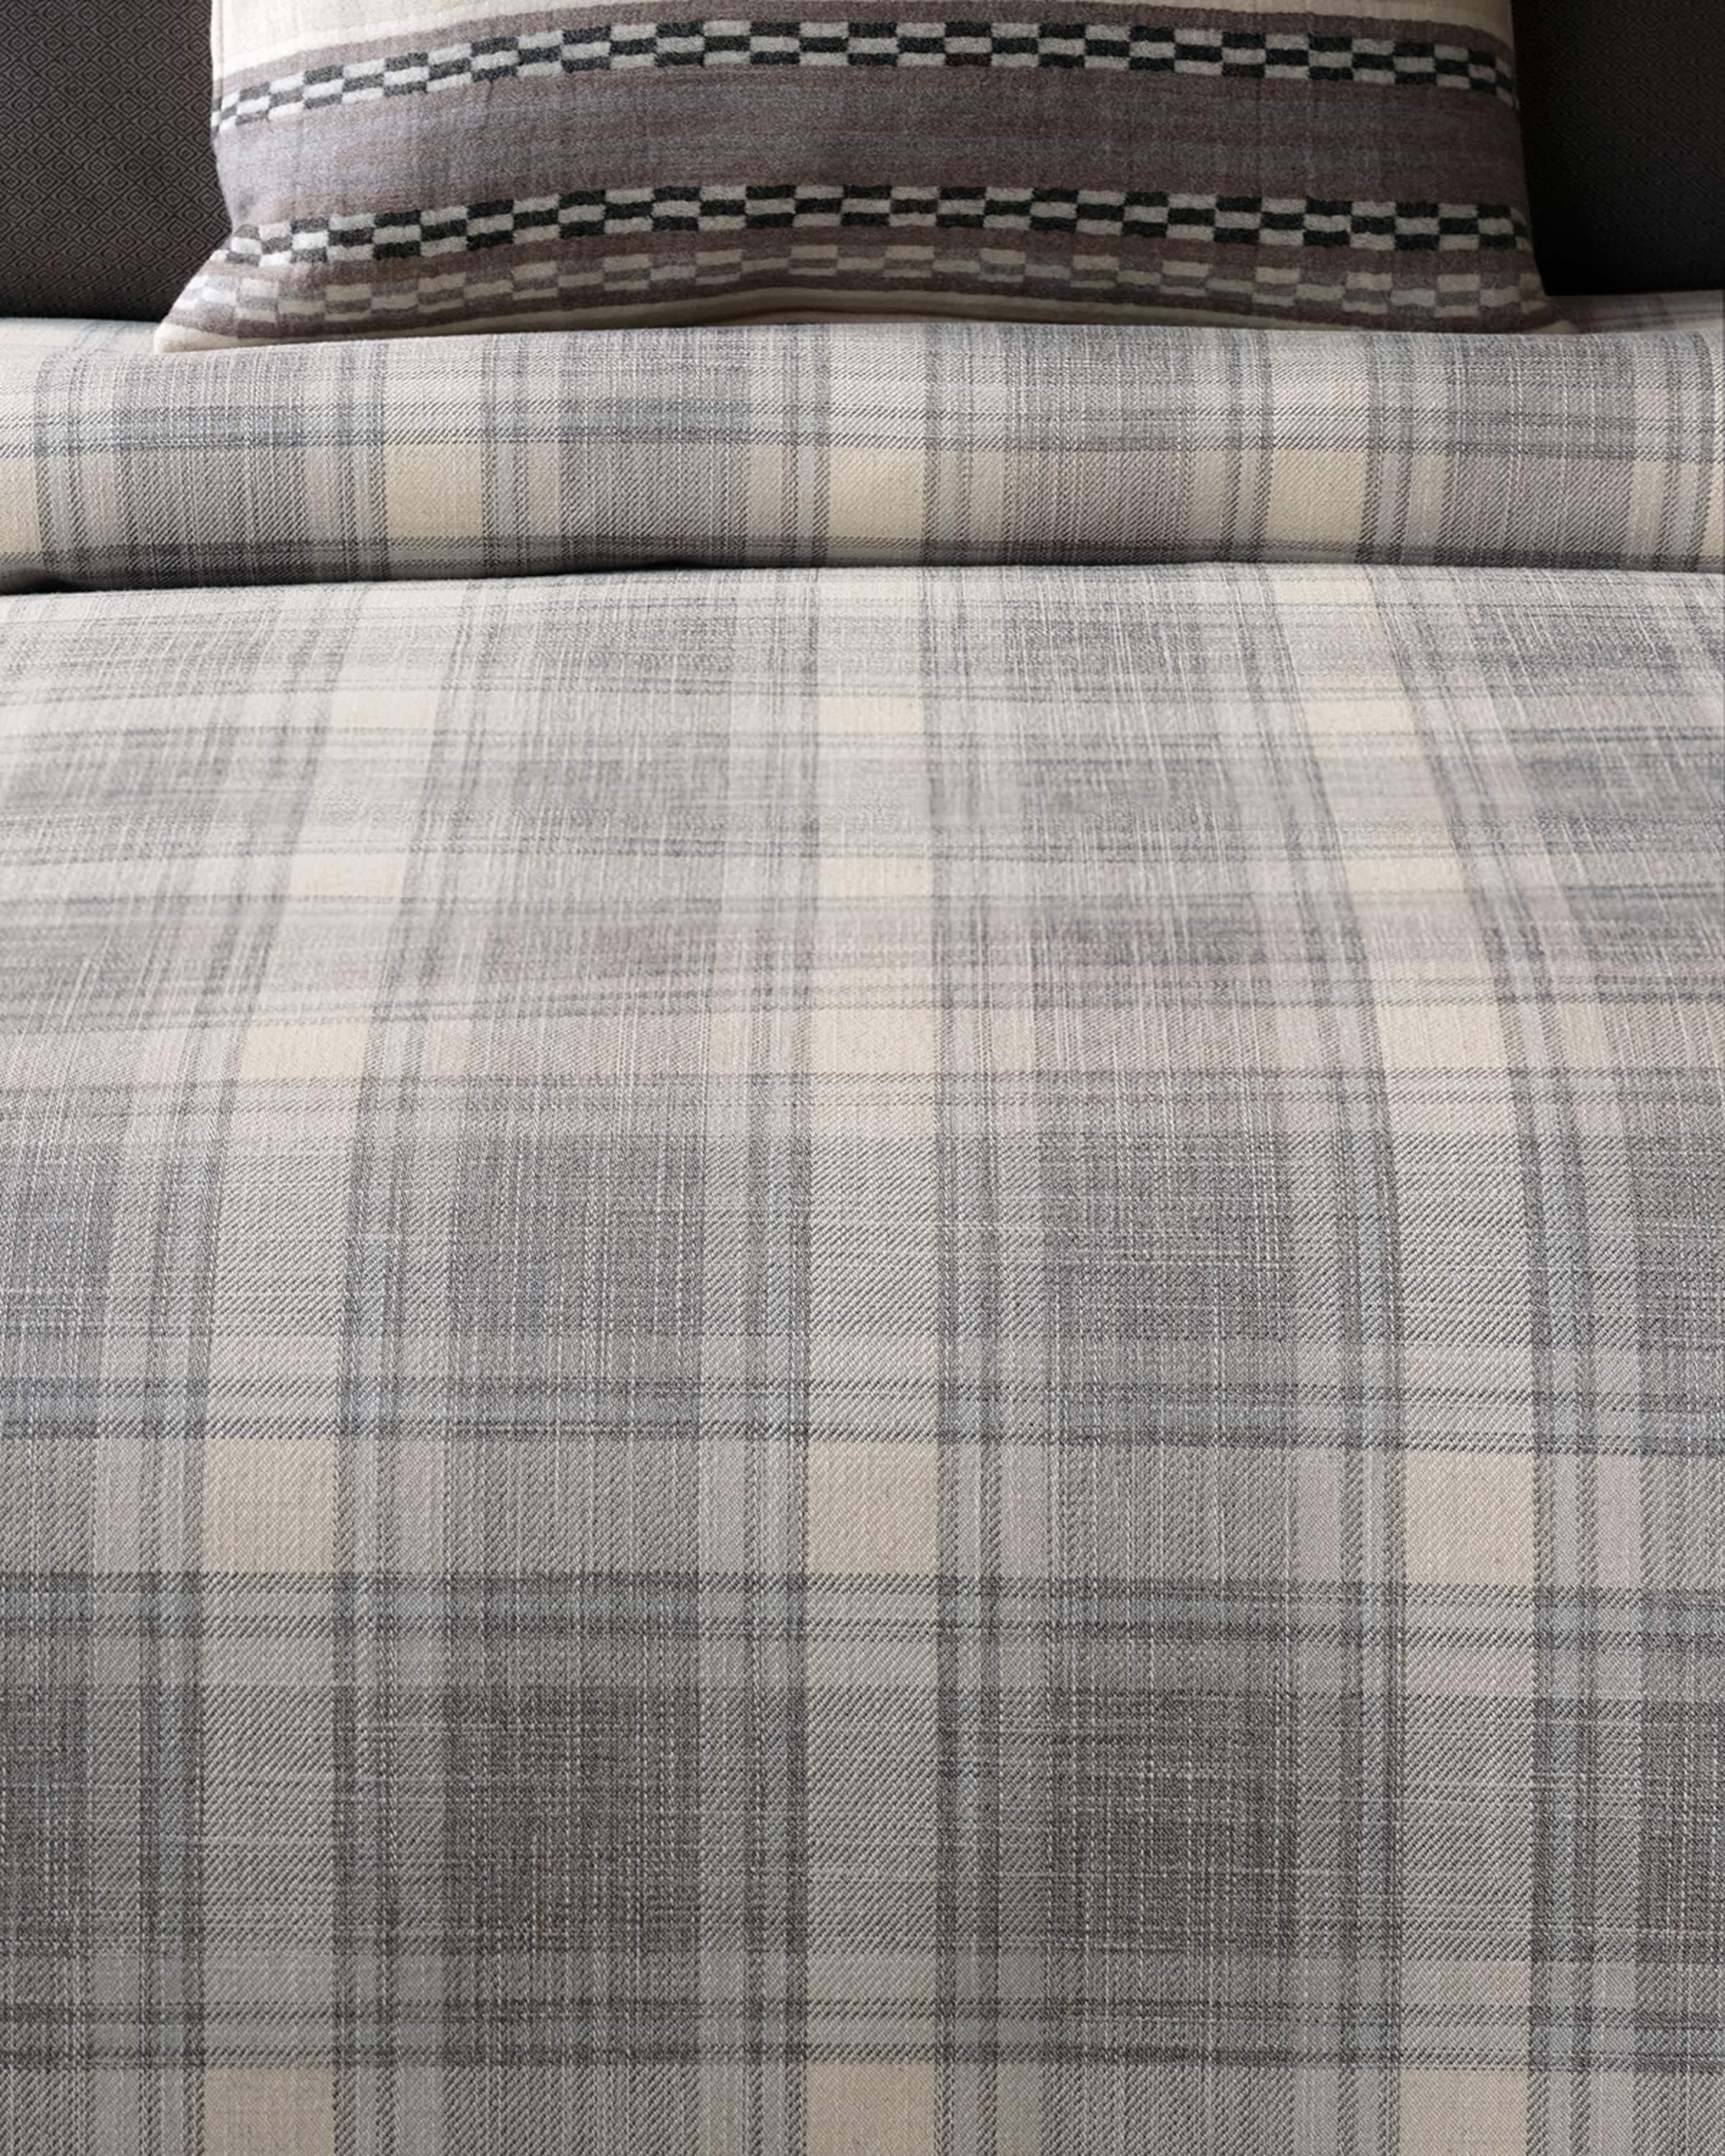 Eastern Accents Telluride Oversized Queen Duvet Cover